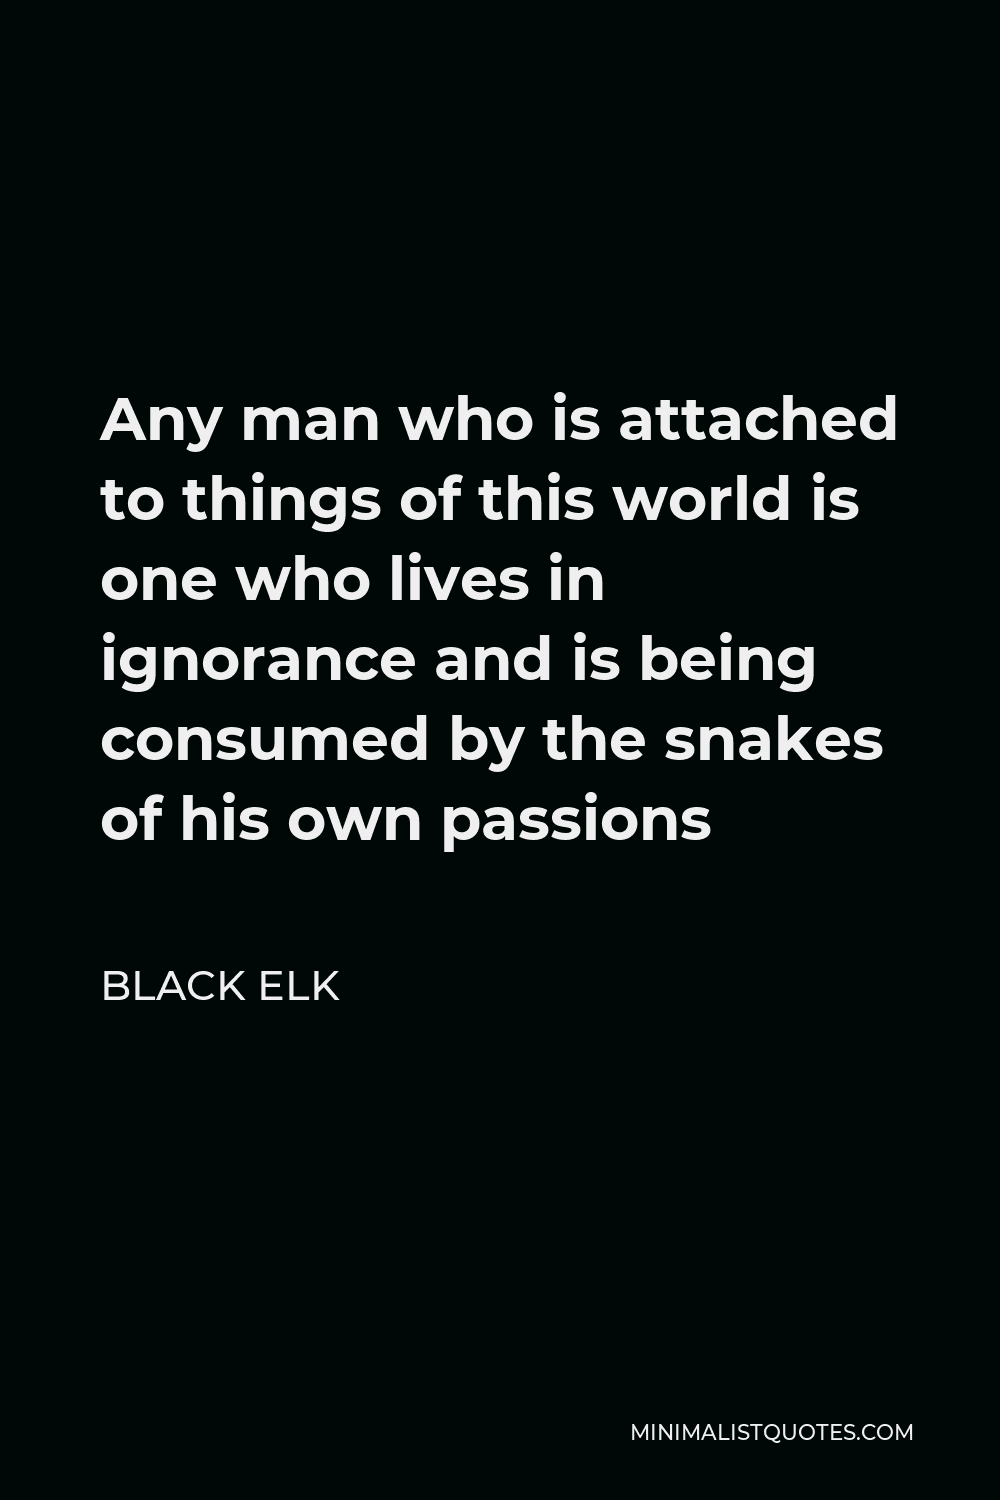 Black Elk Quote - Any man who is attached to things of this world is one who lives in ignorance and is being consumed by the snakes of his own passions